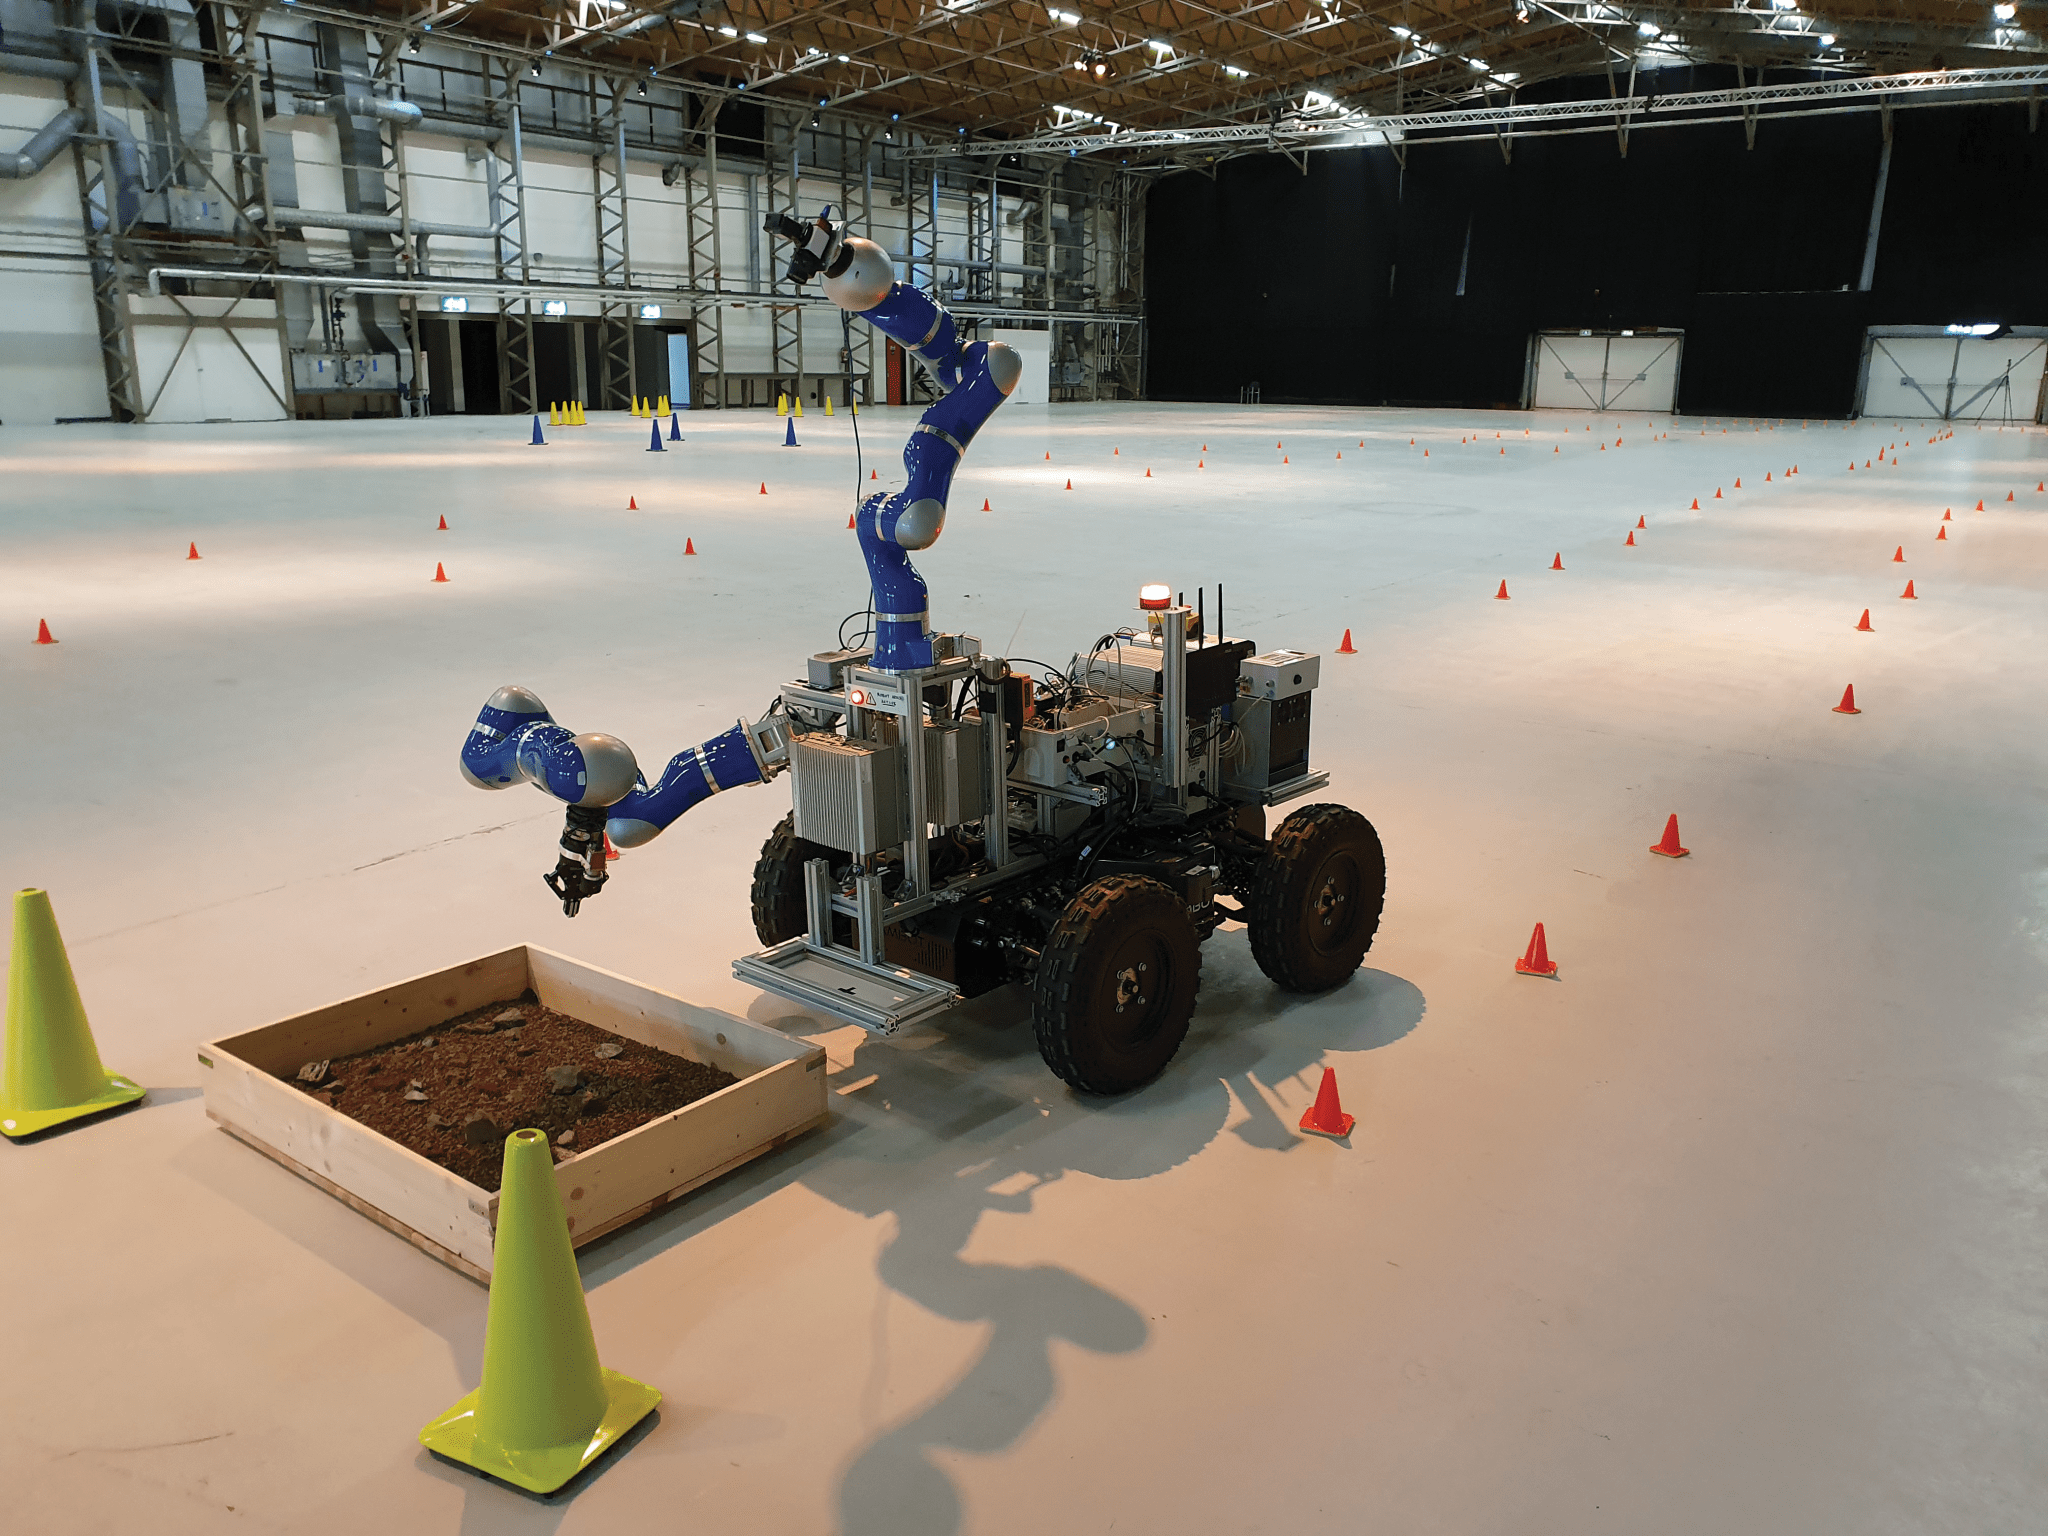 image of an analog rover being tested on the ground